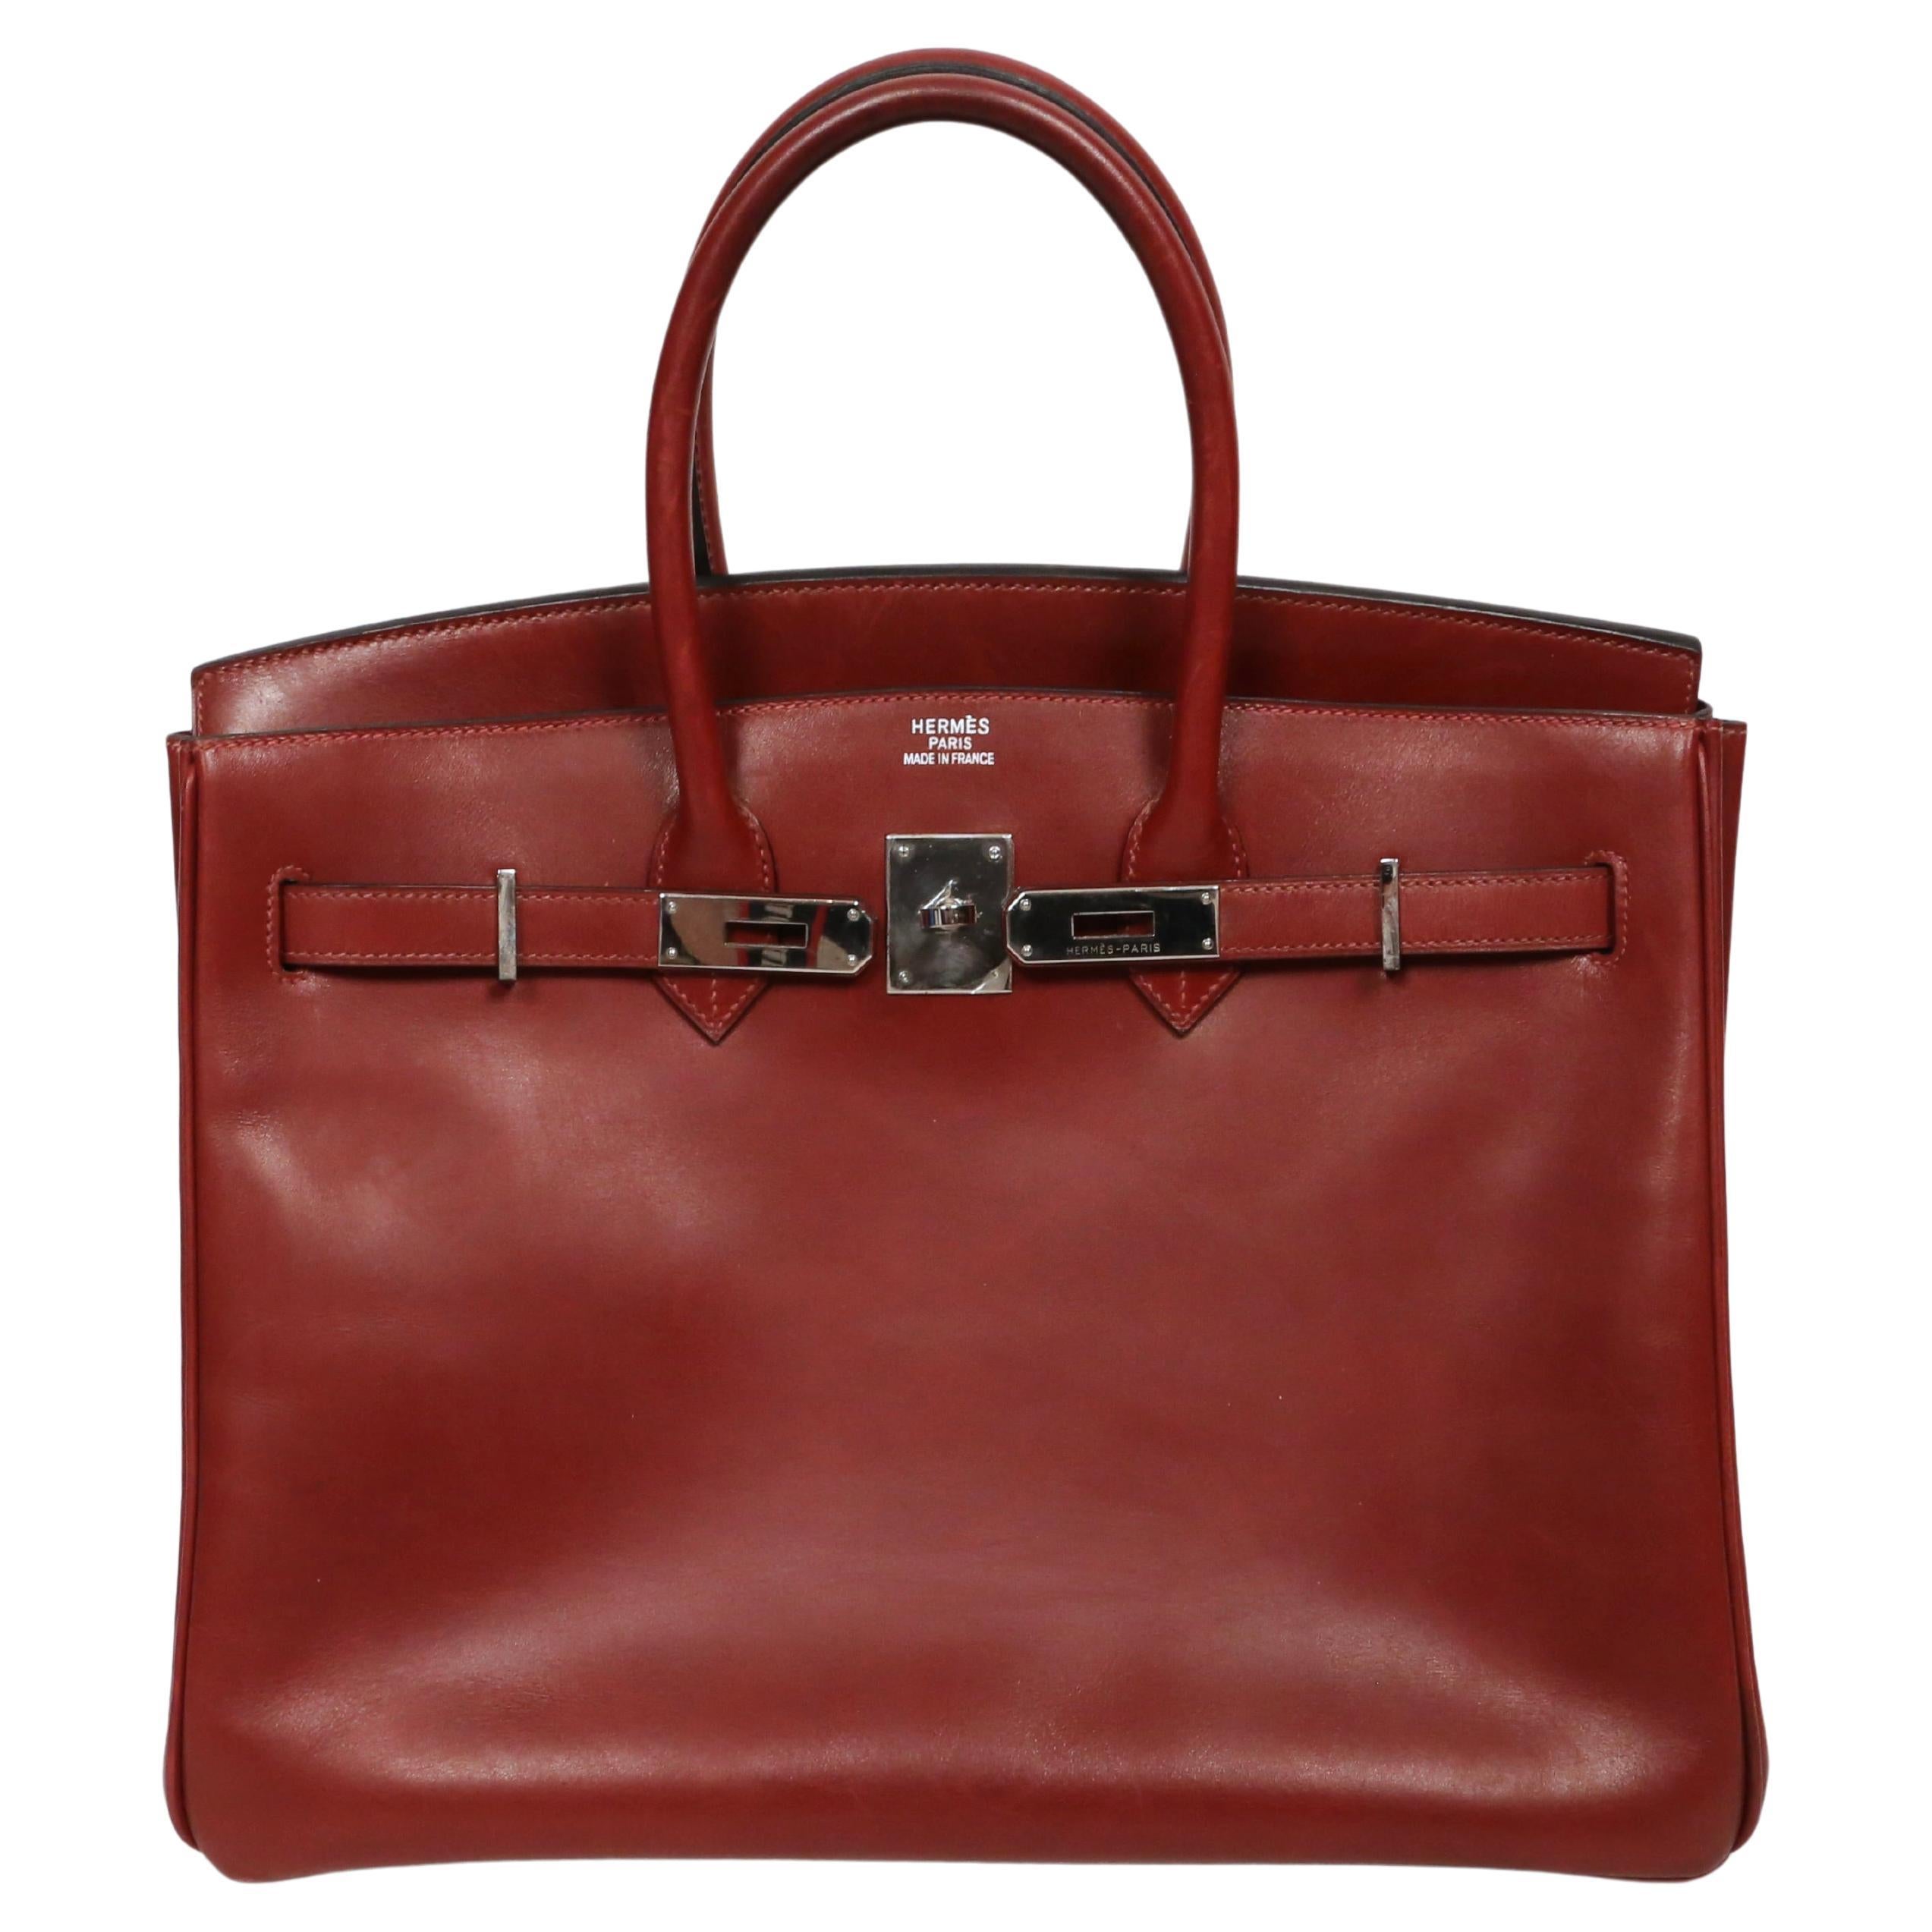 Very rare and beautiful 35 cm Rouge box leather Birkin bag from Hermès dating to 2005 . 

Color is a deep red-burgundy and the hardware is palladium plated (silver toned). 

The dimensions of the bag are approximately 14